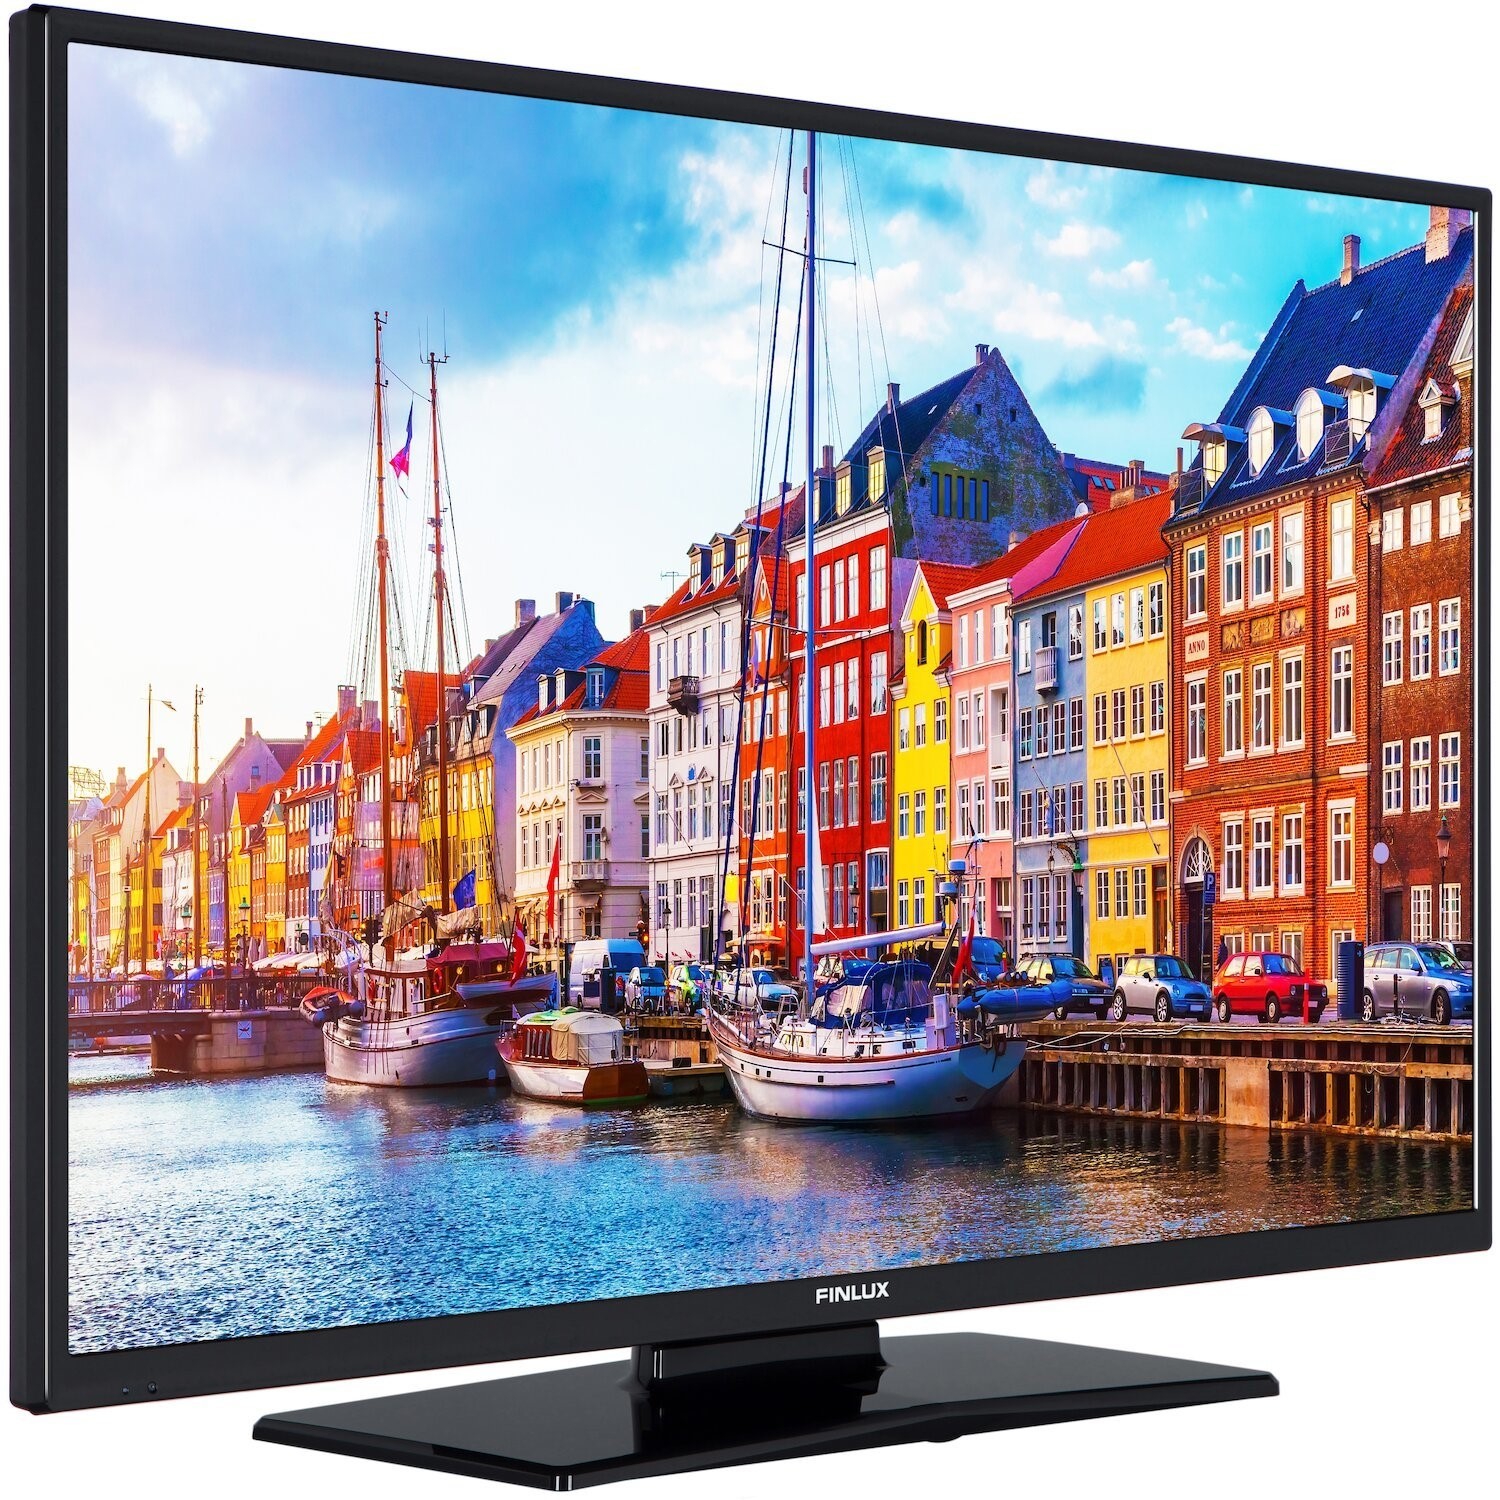 Finlux 32" HD Smart LED TV with HD and Freeview - BuyItDirect.ie